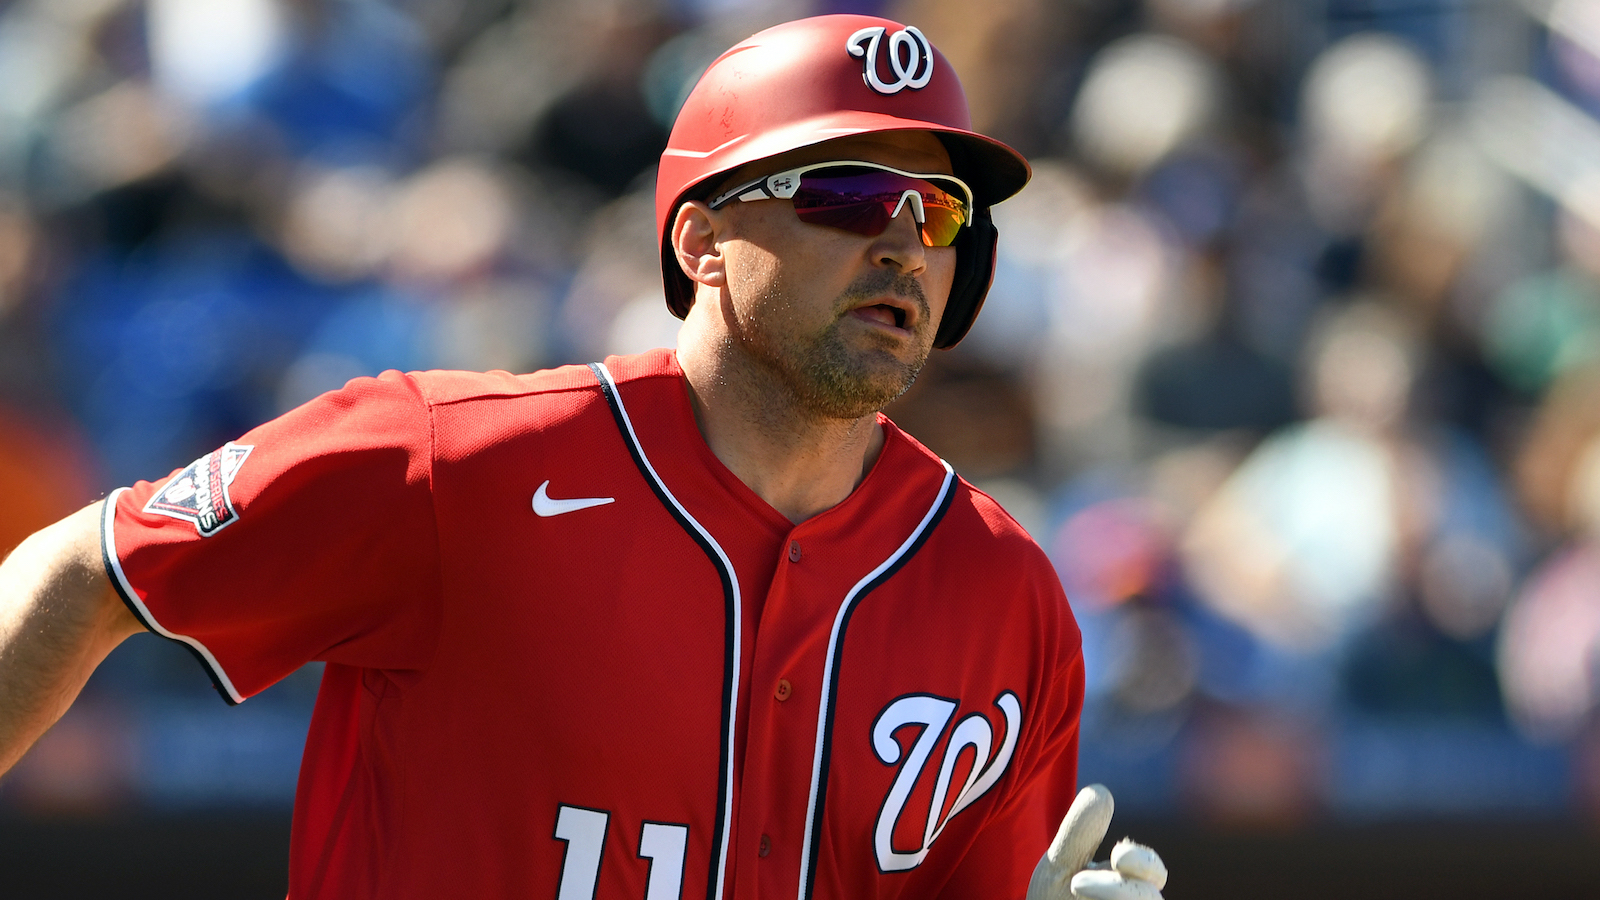 From the very beginning': Nationals retire Zimmerman's 11